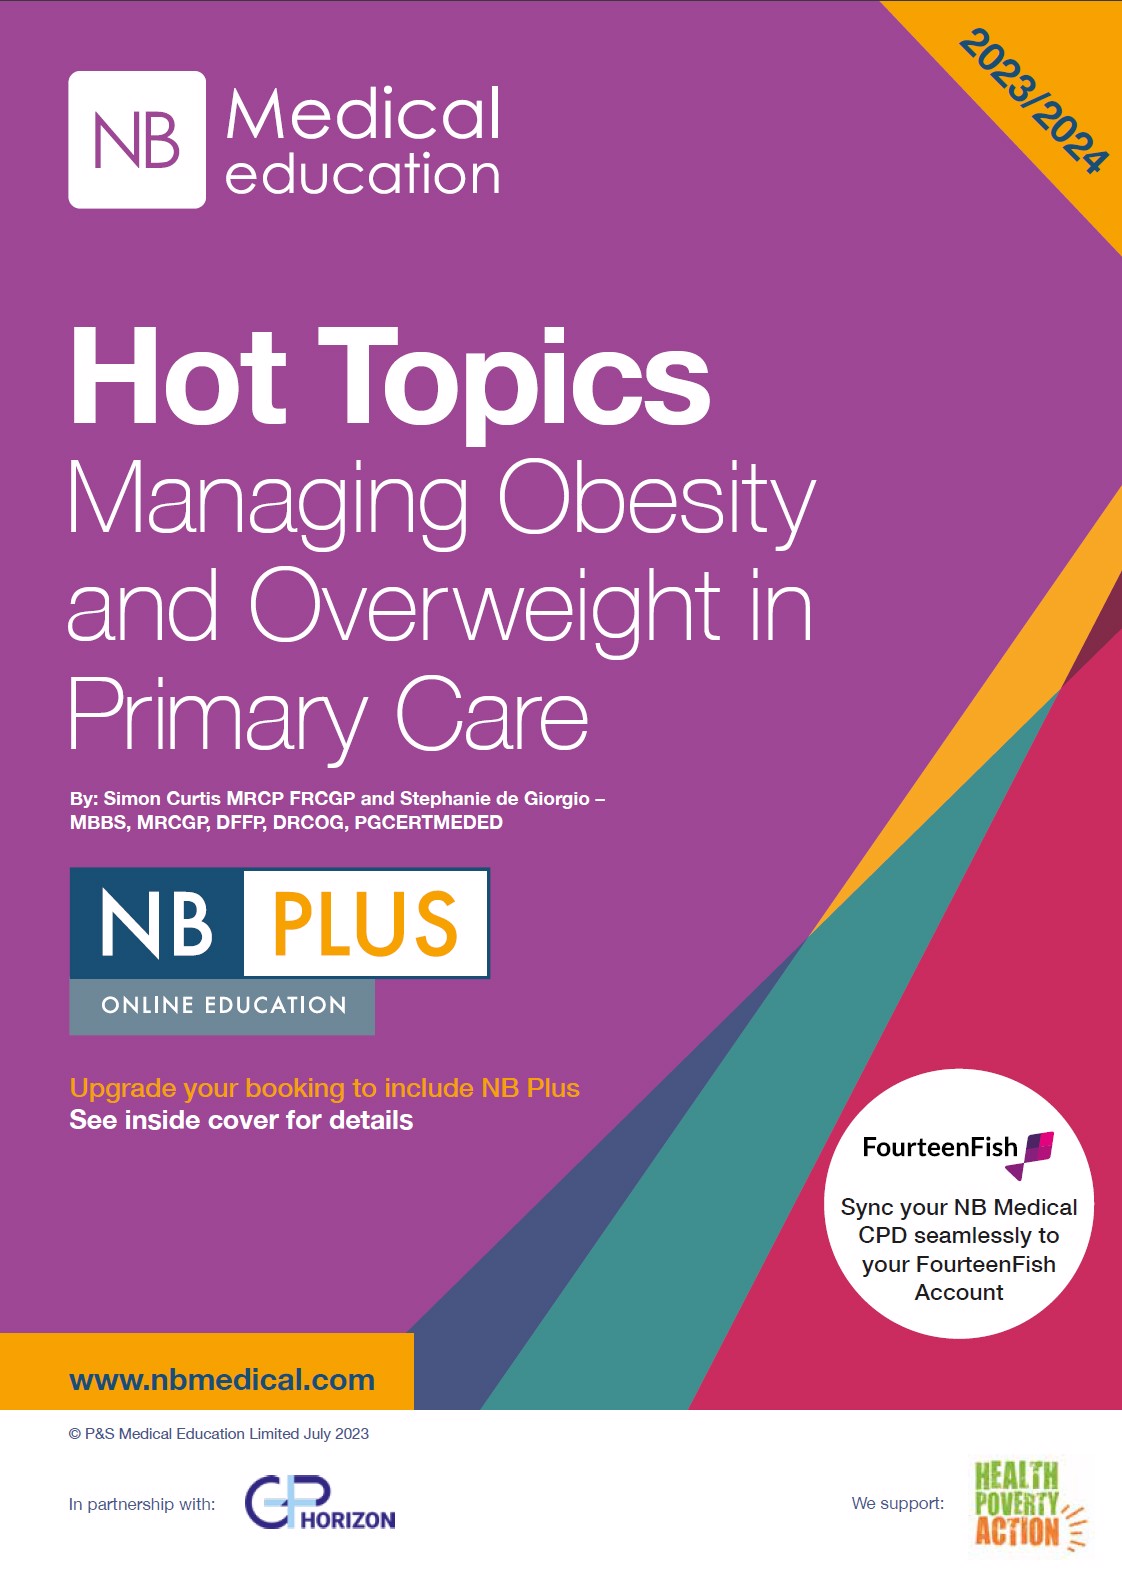 Hot Topics Managing Obesity and Overweight in Primary Care 2023-2024 Booklet